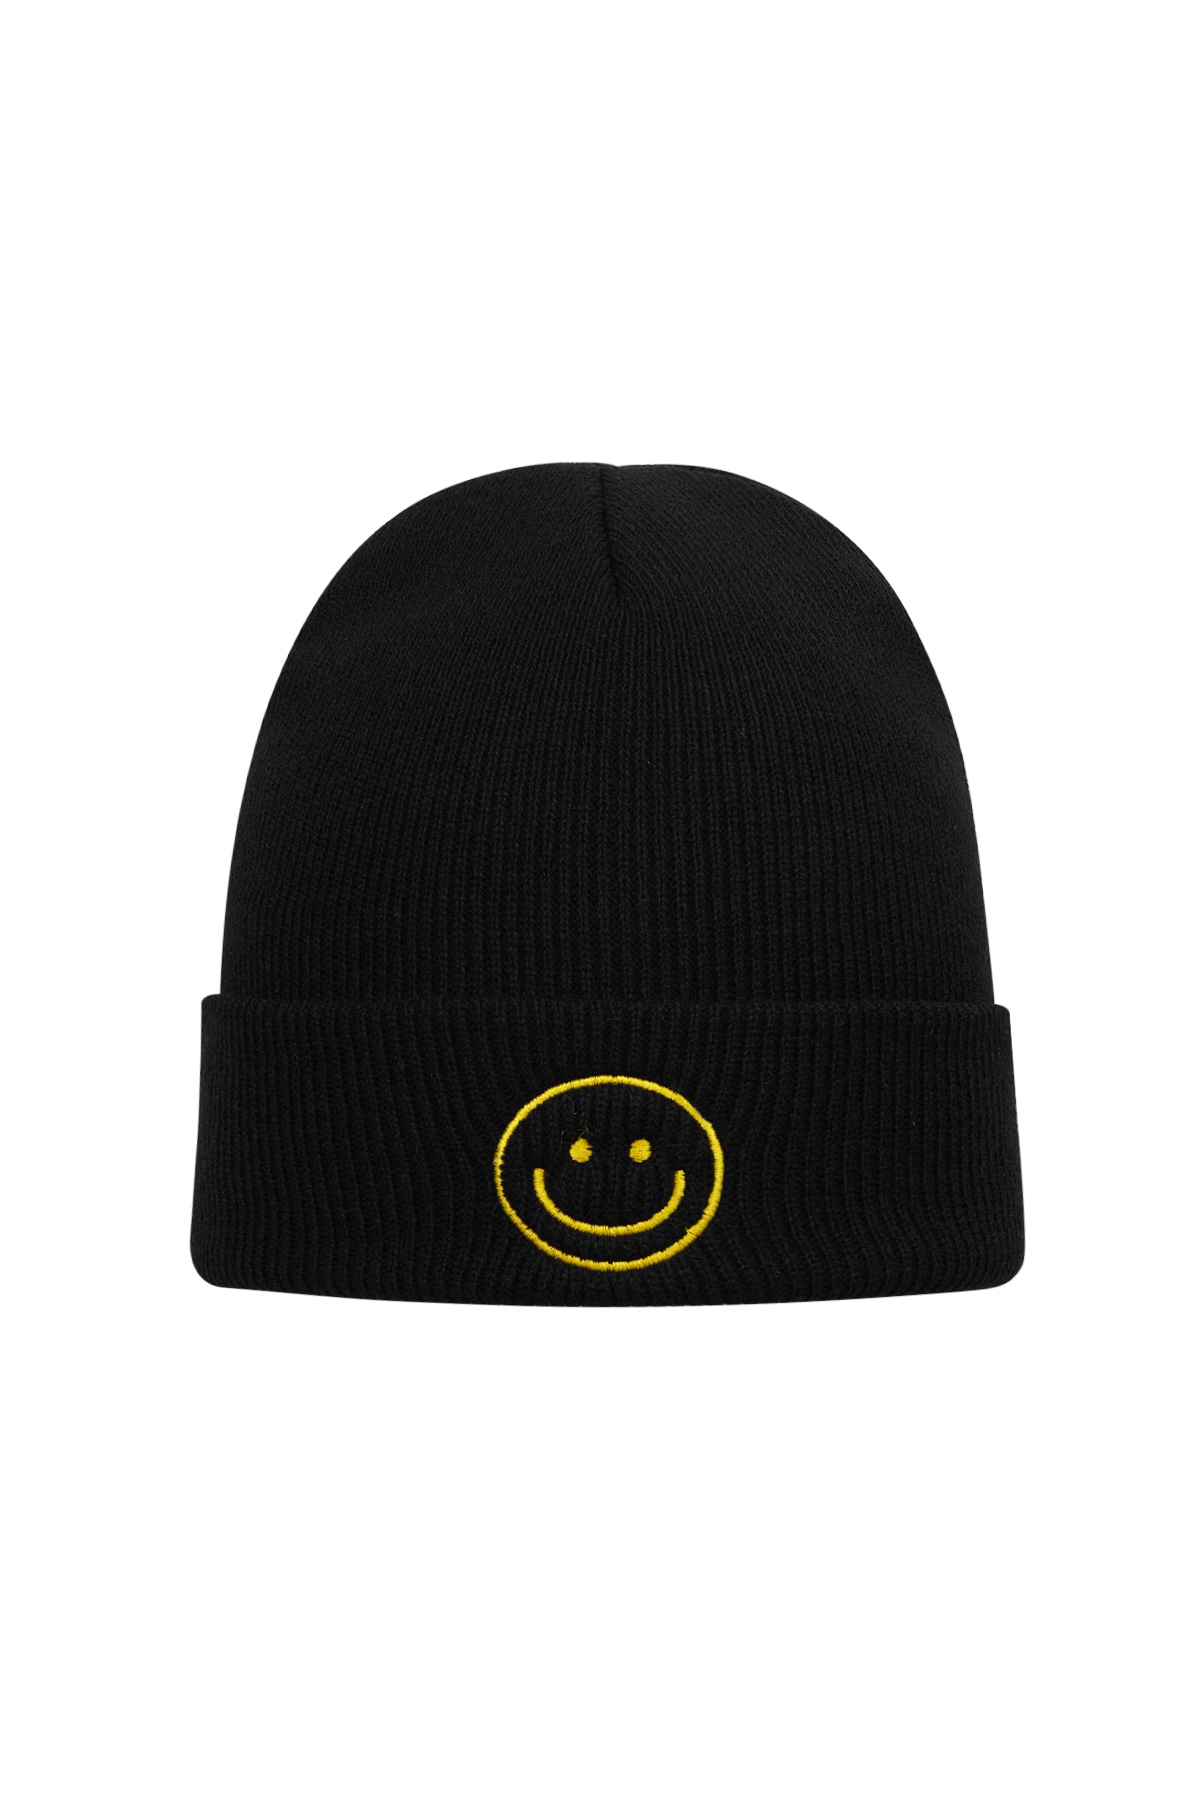 Colorful beanie with smiley - black h5 